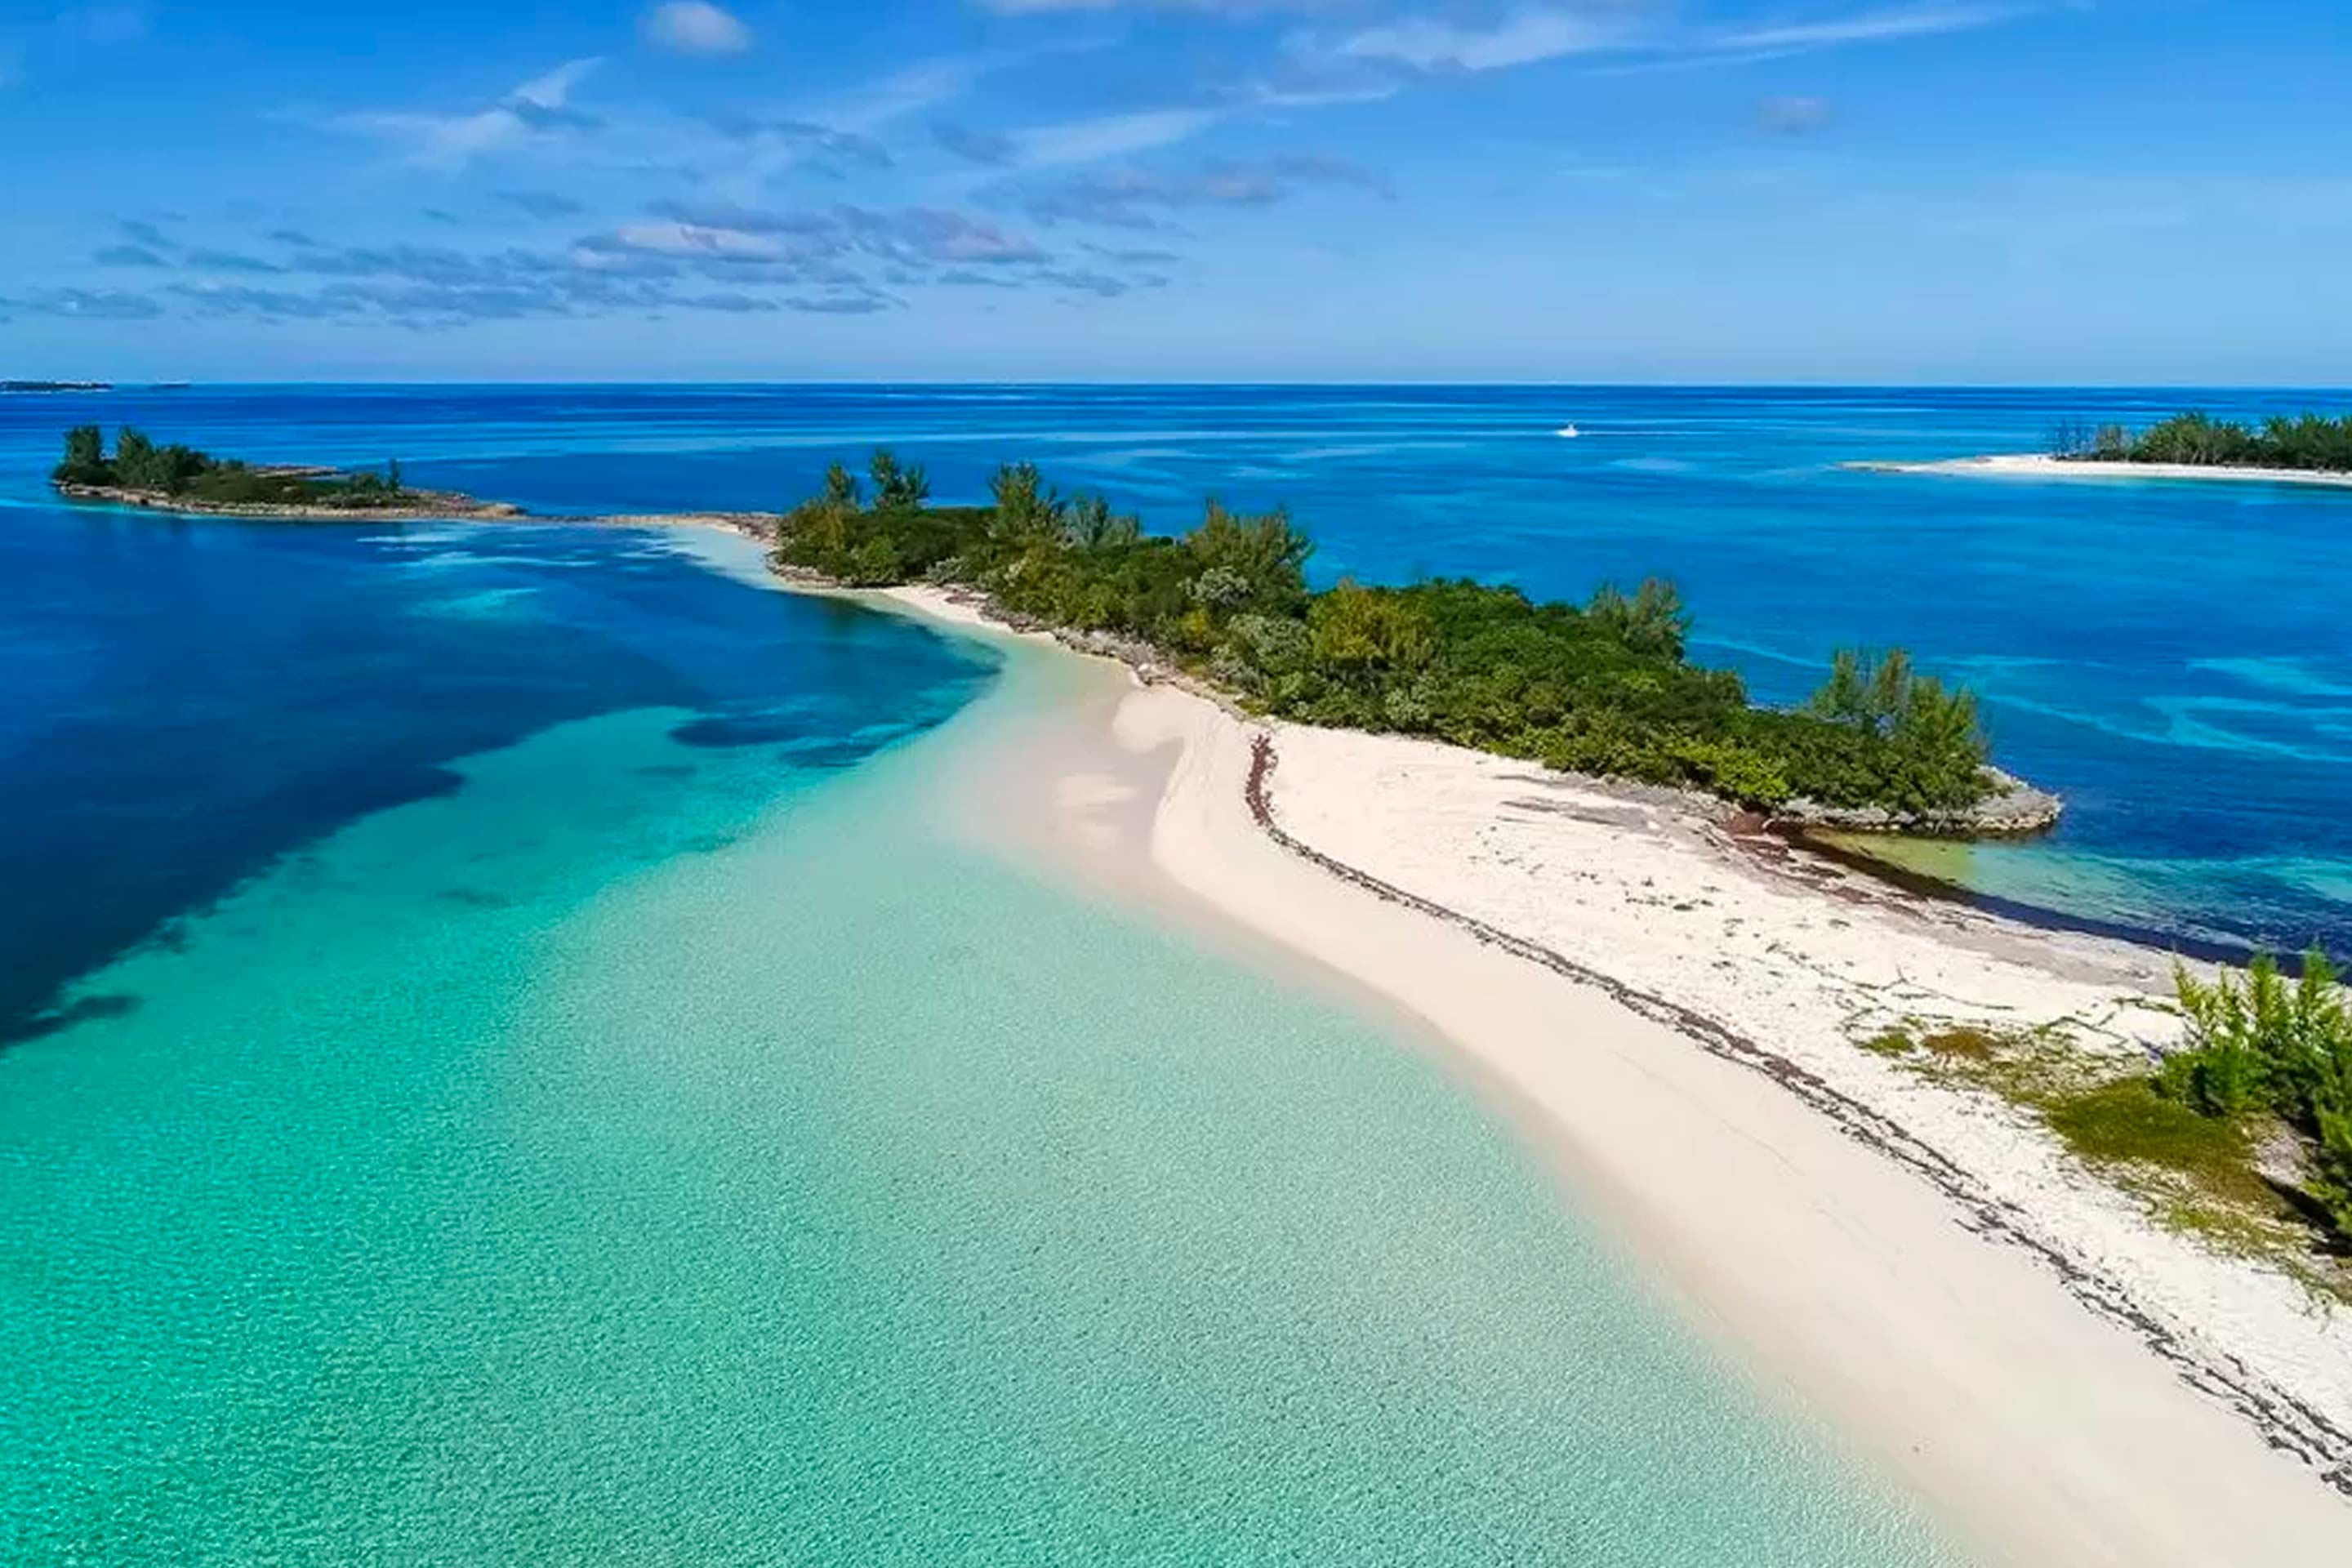 A view of an island in the Bahamas, powered by a microgrid